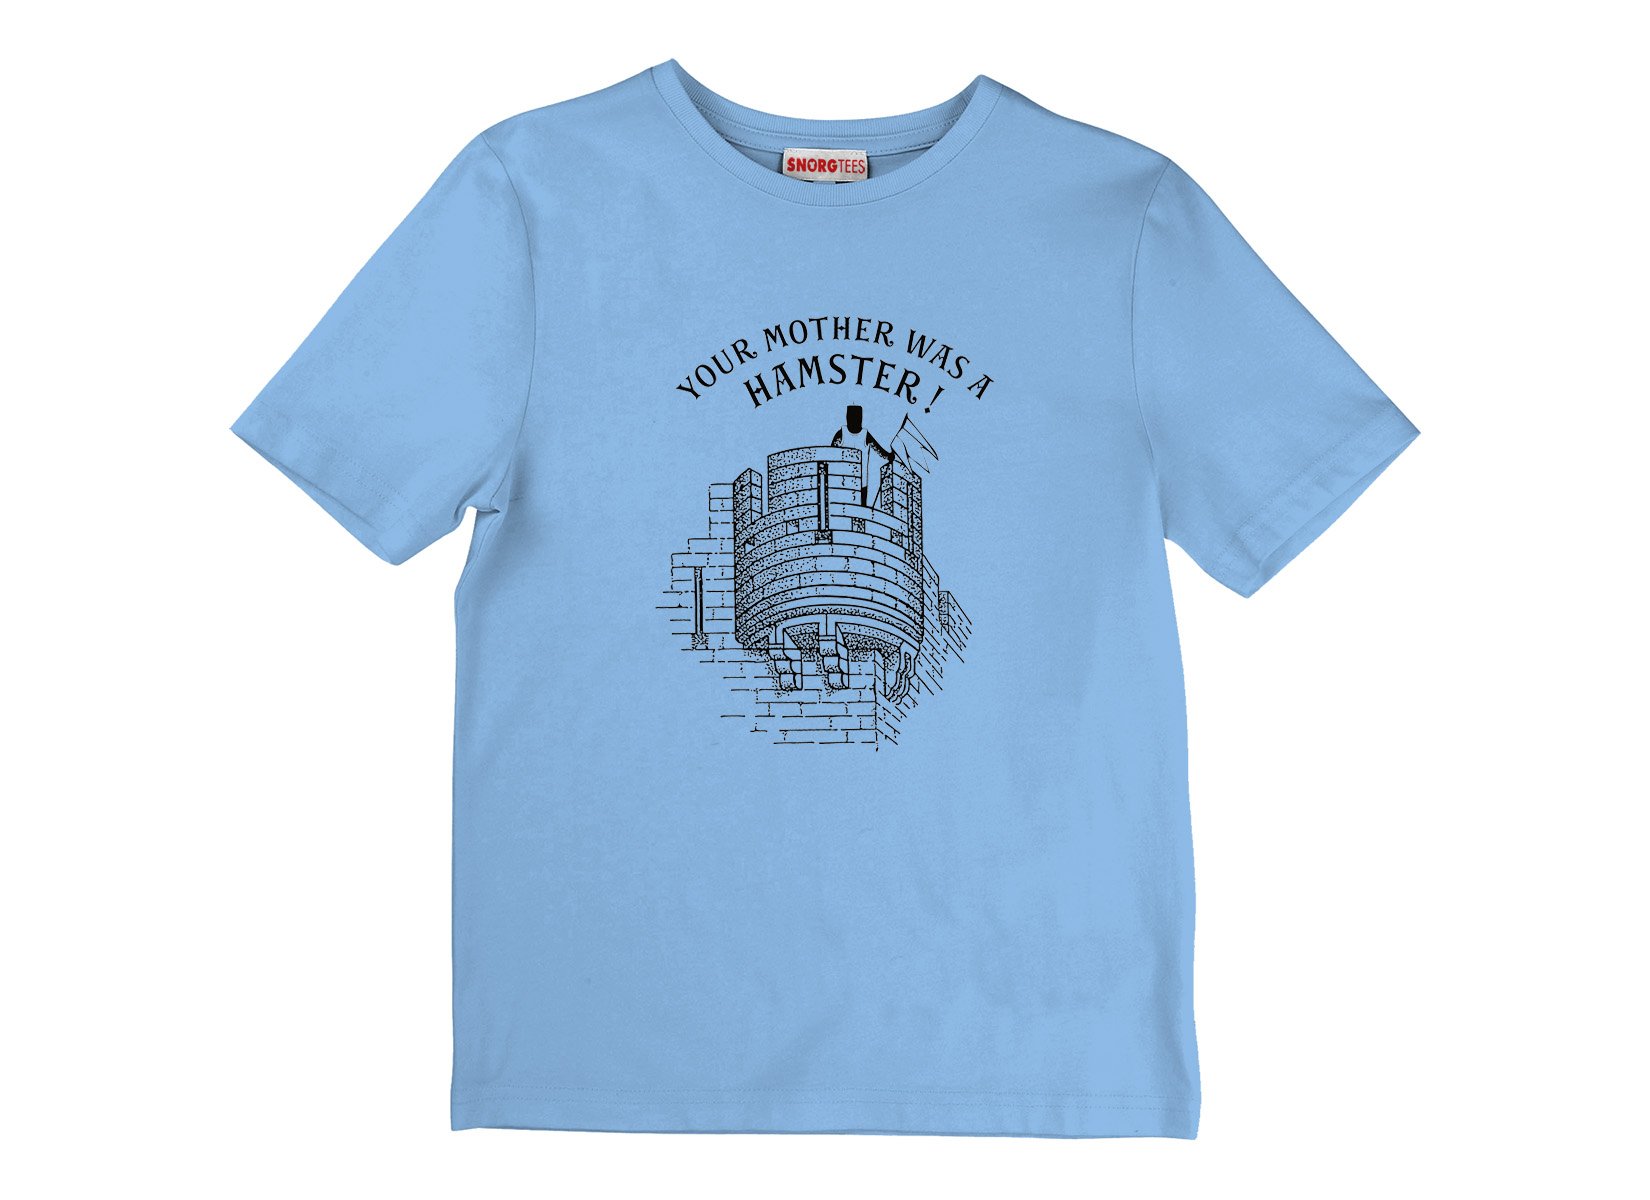 Your Mother Was A Hamster Monty Python T Shirt Image2